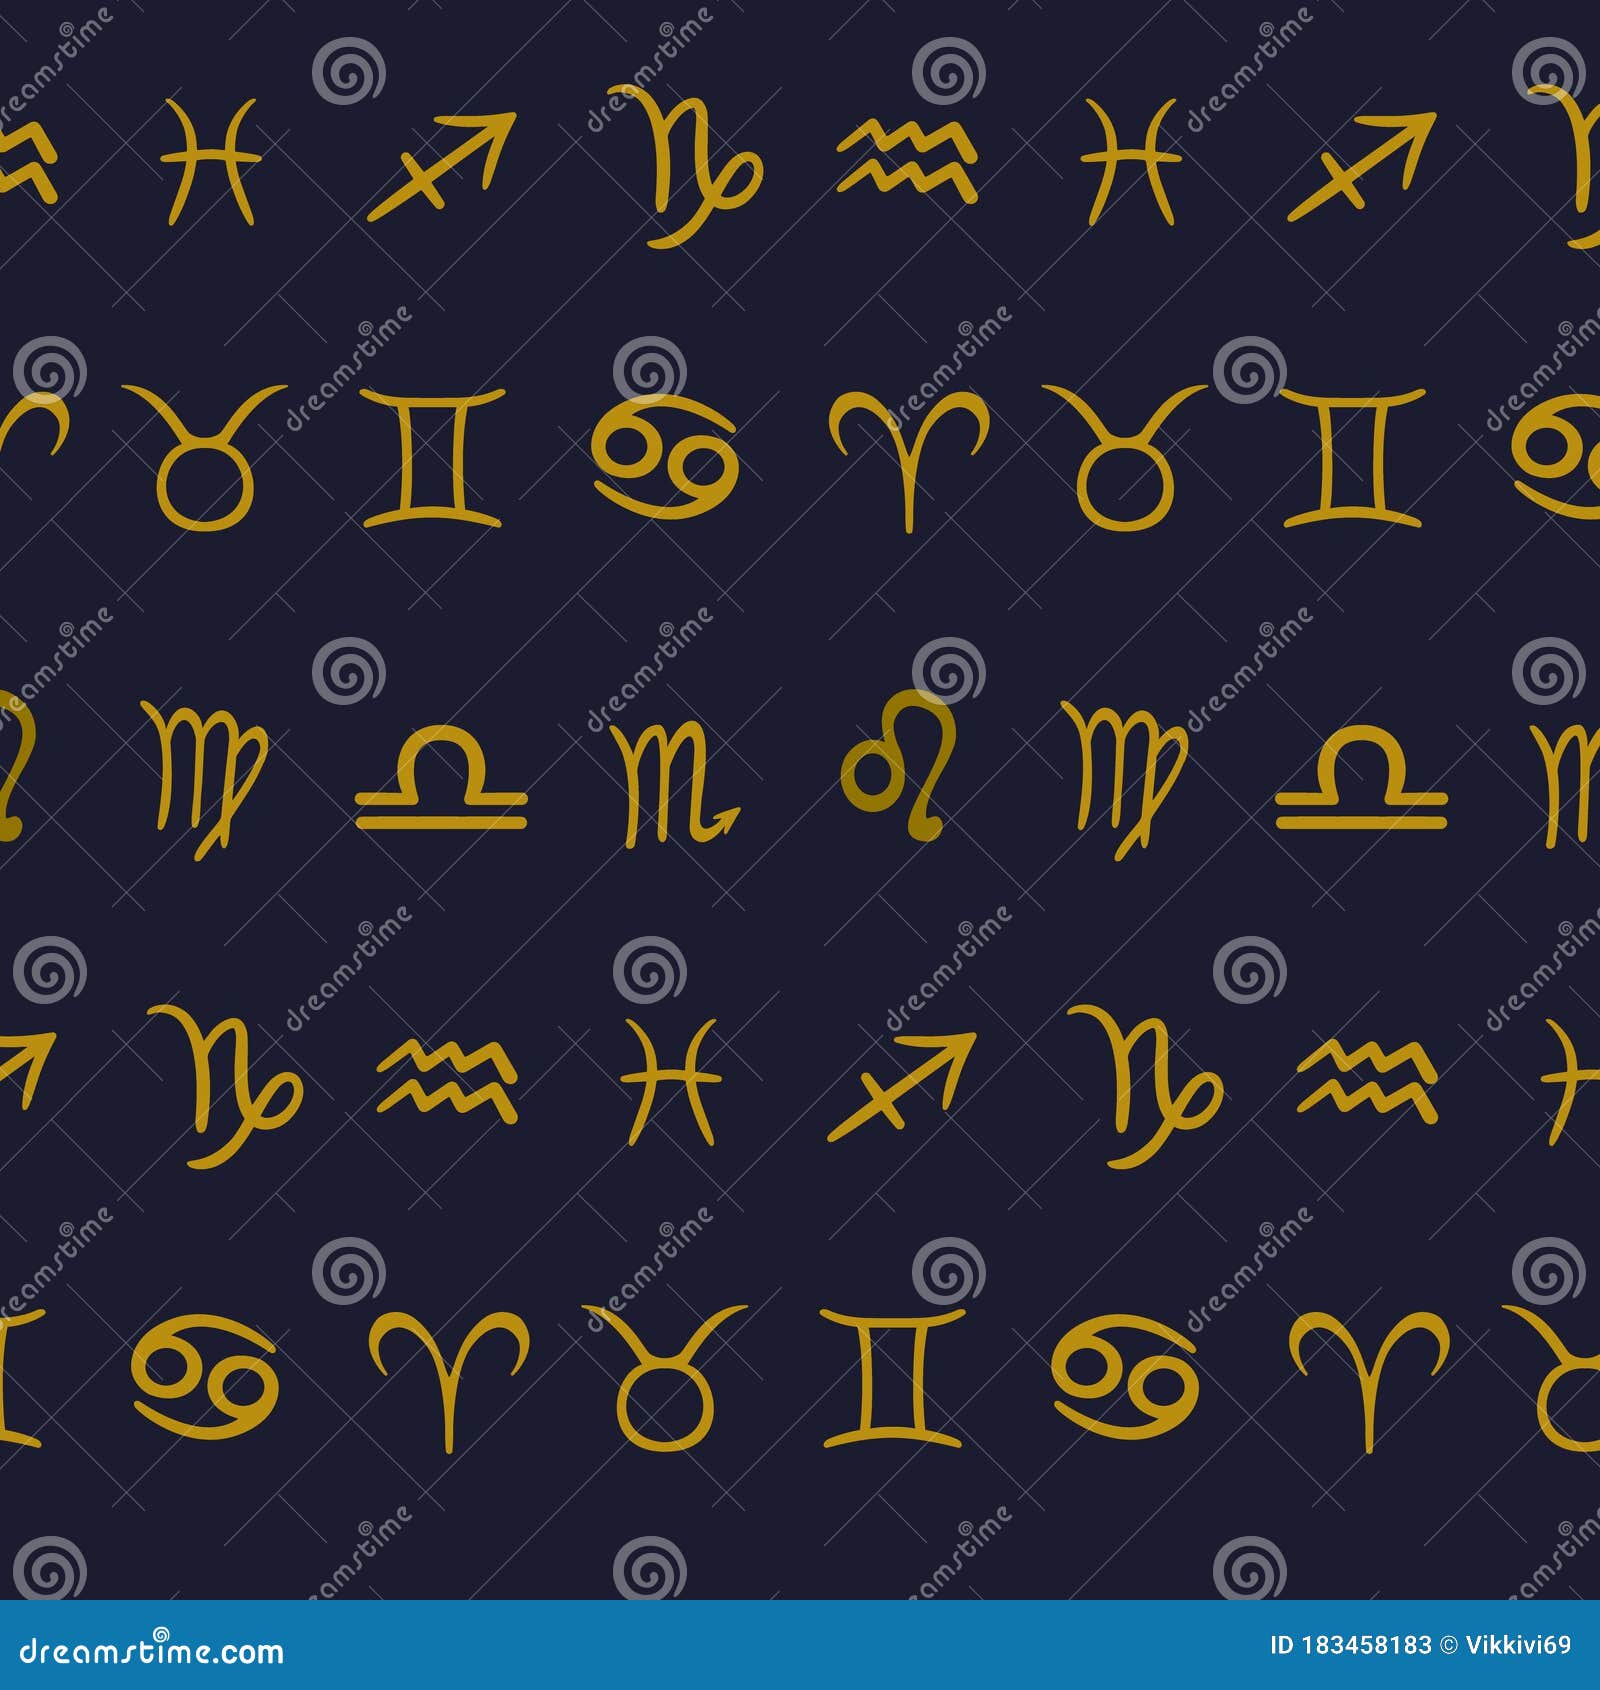 Zodiac Signs. Ornament with Zodiac Signs. Vector Doodle Style Design ...